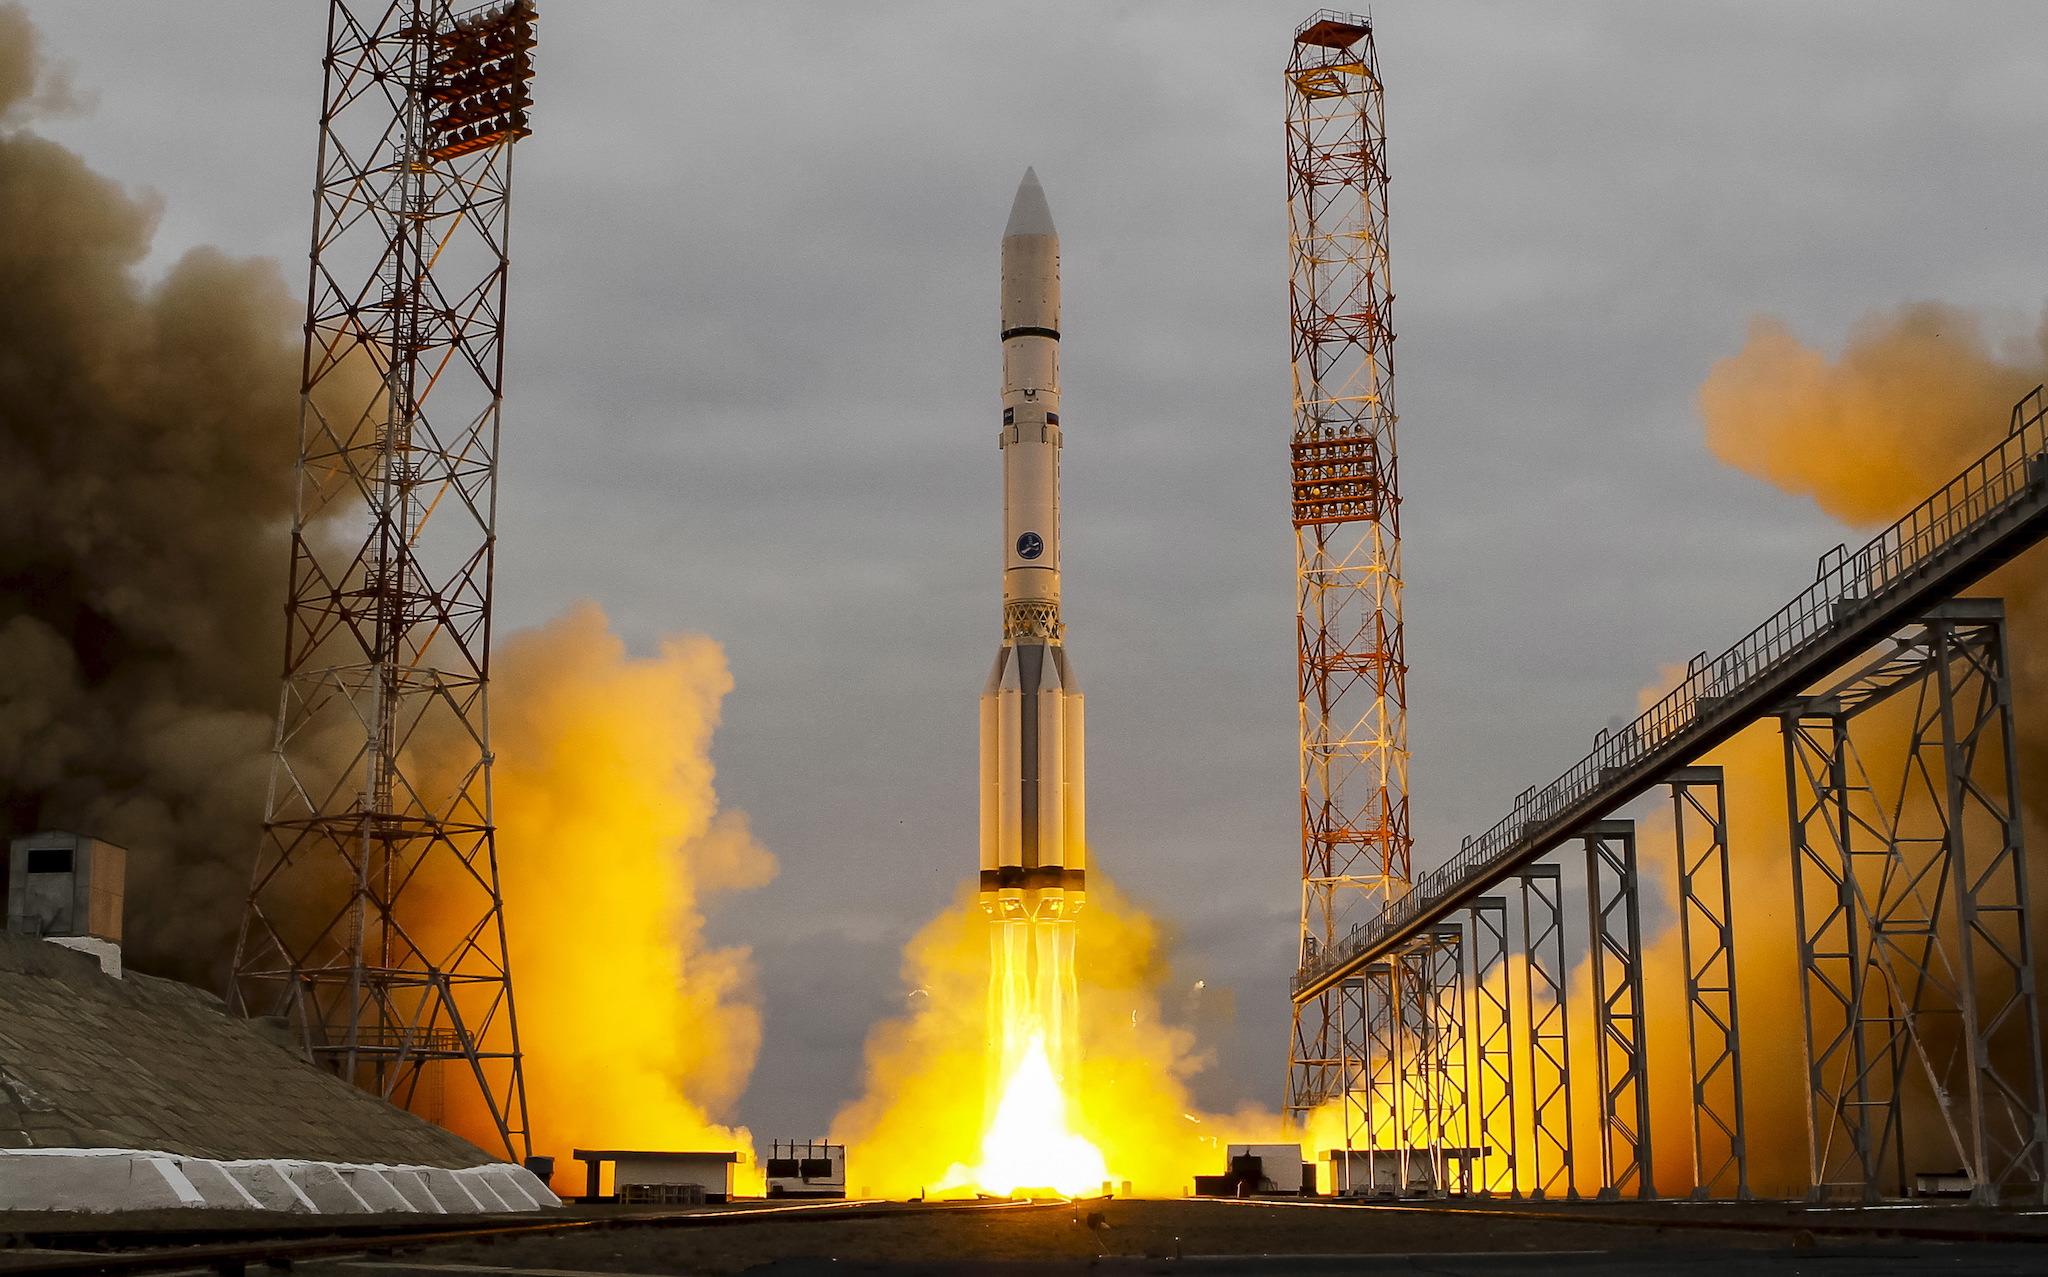 The Proton-M rocket, carrying the ExoMars 2016 spacecraft to Mars, blasts off from the launchpad at the Baikonur cosmodrome, Kazakhstan